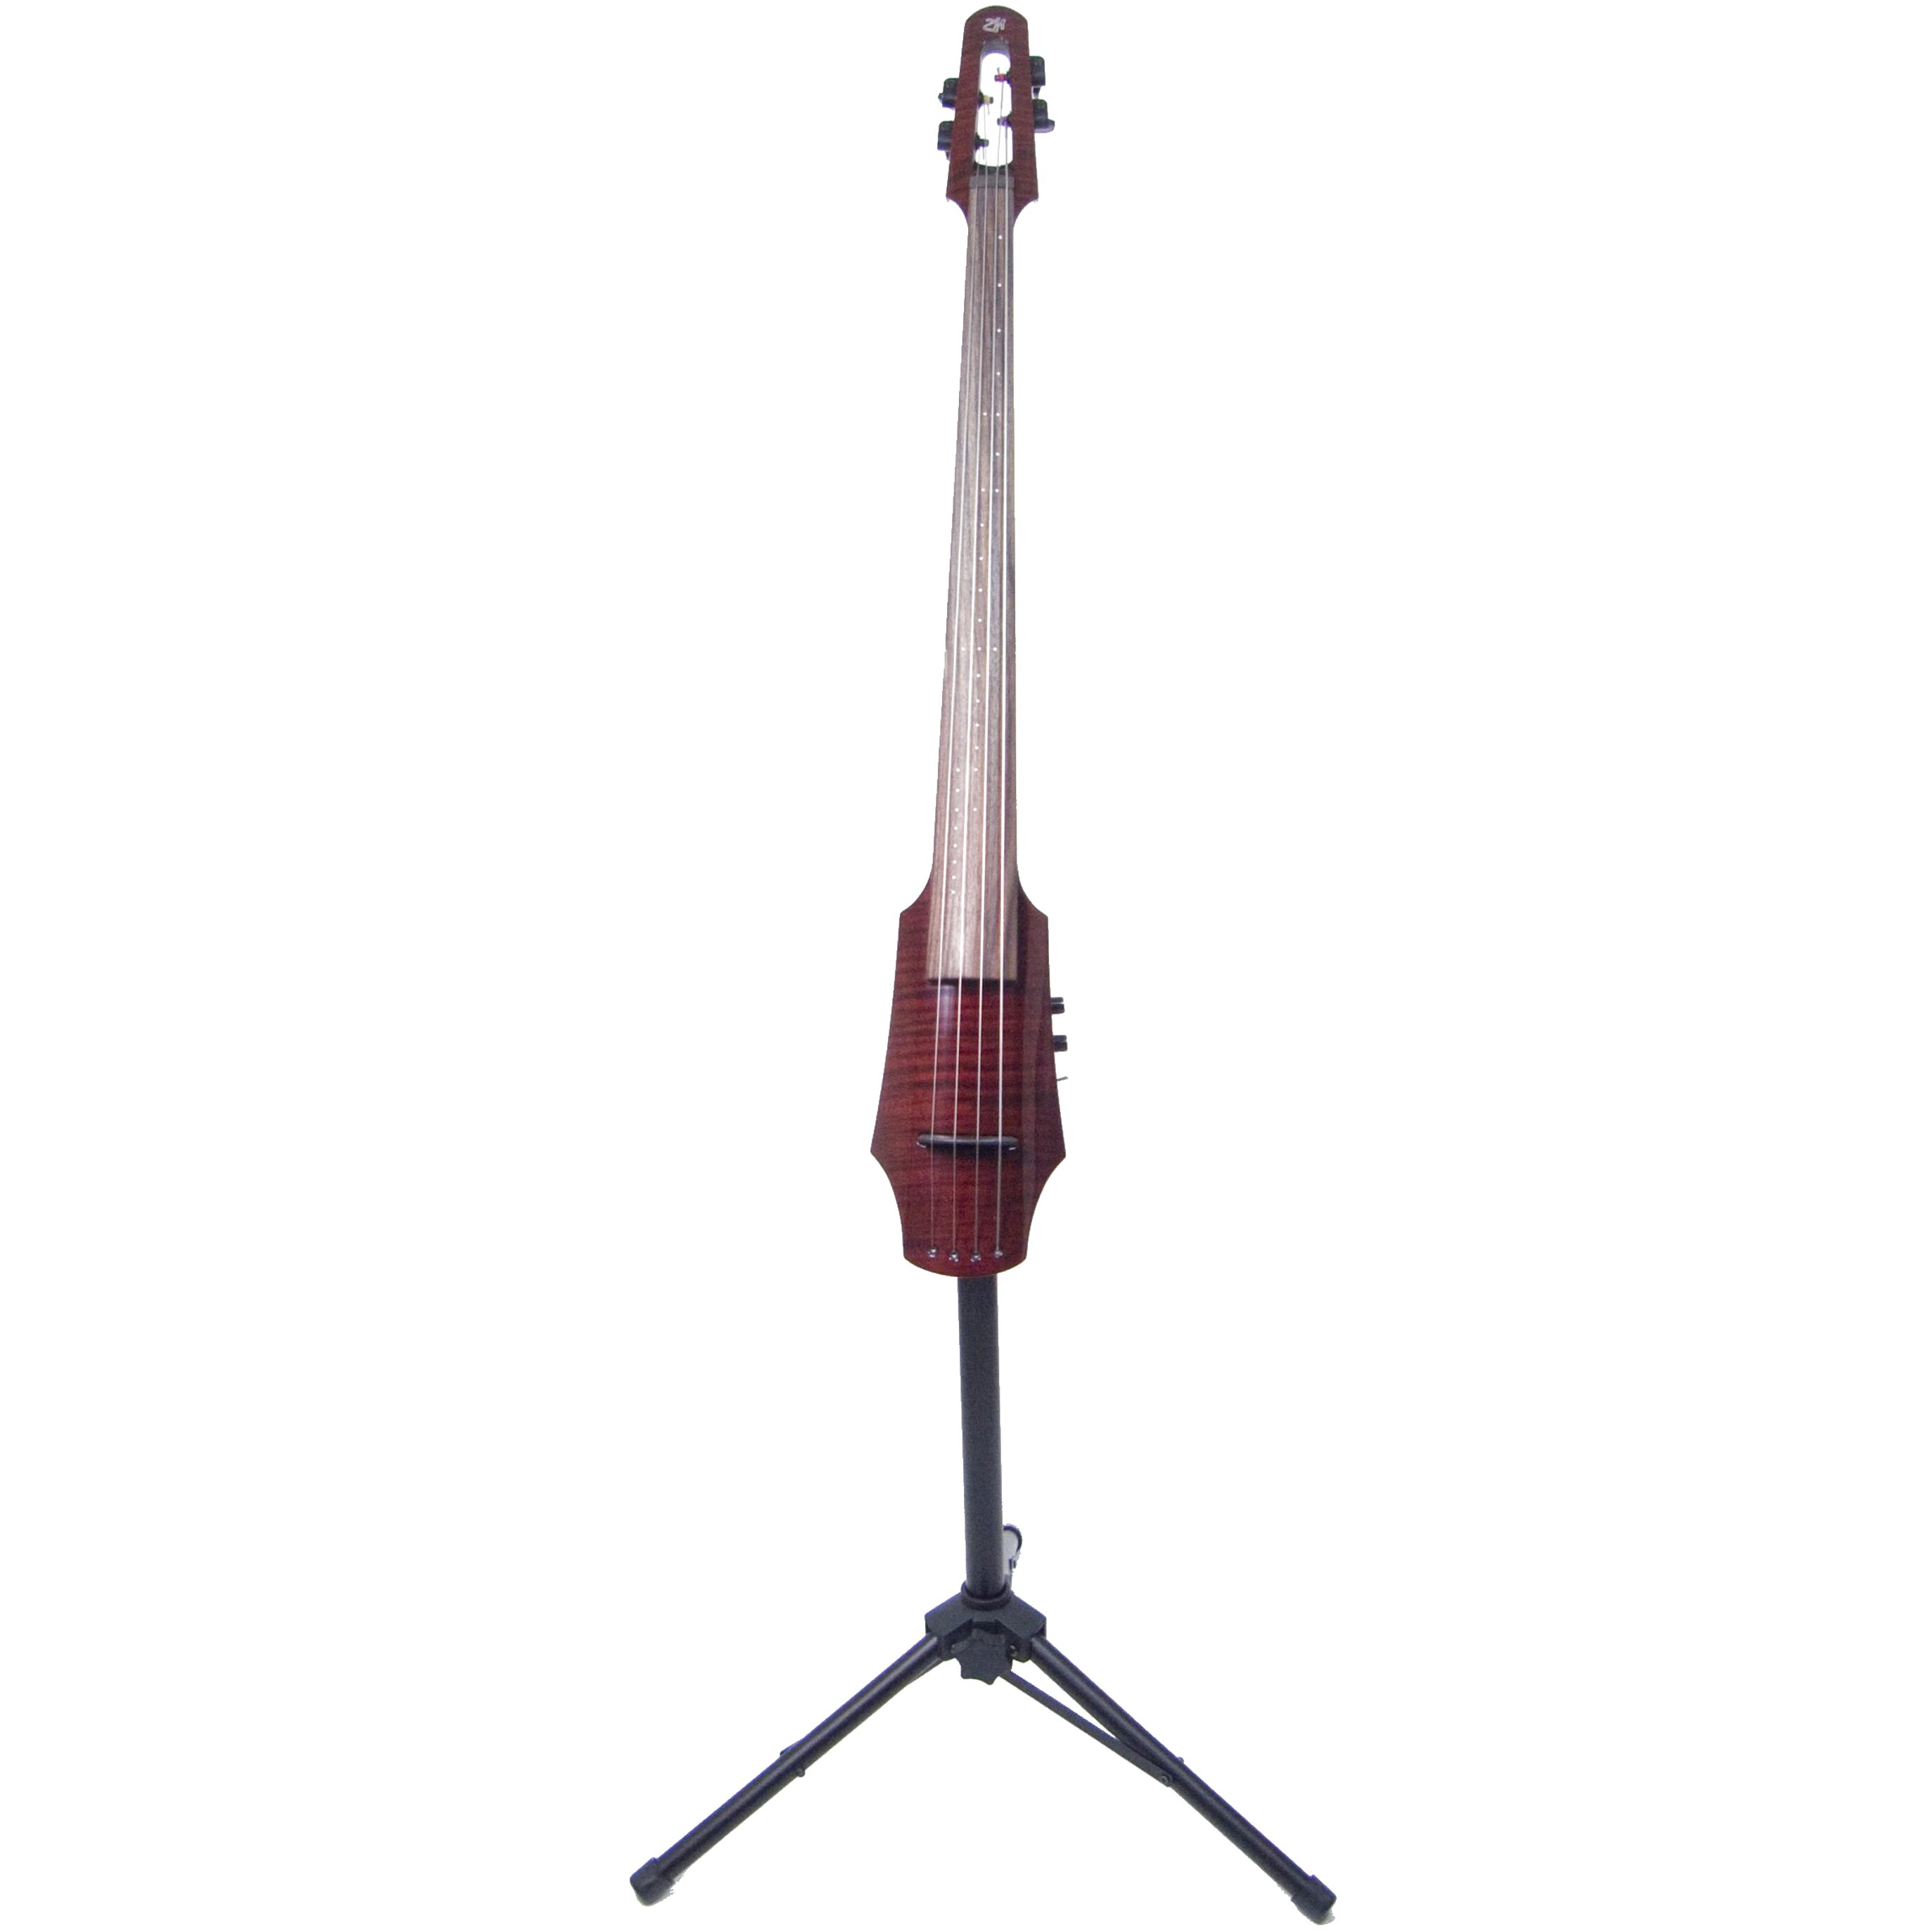 Electric Cello for sale in UK | 53 used Electric Cellos